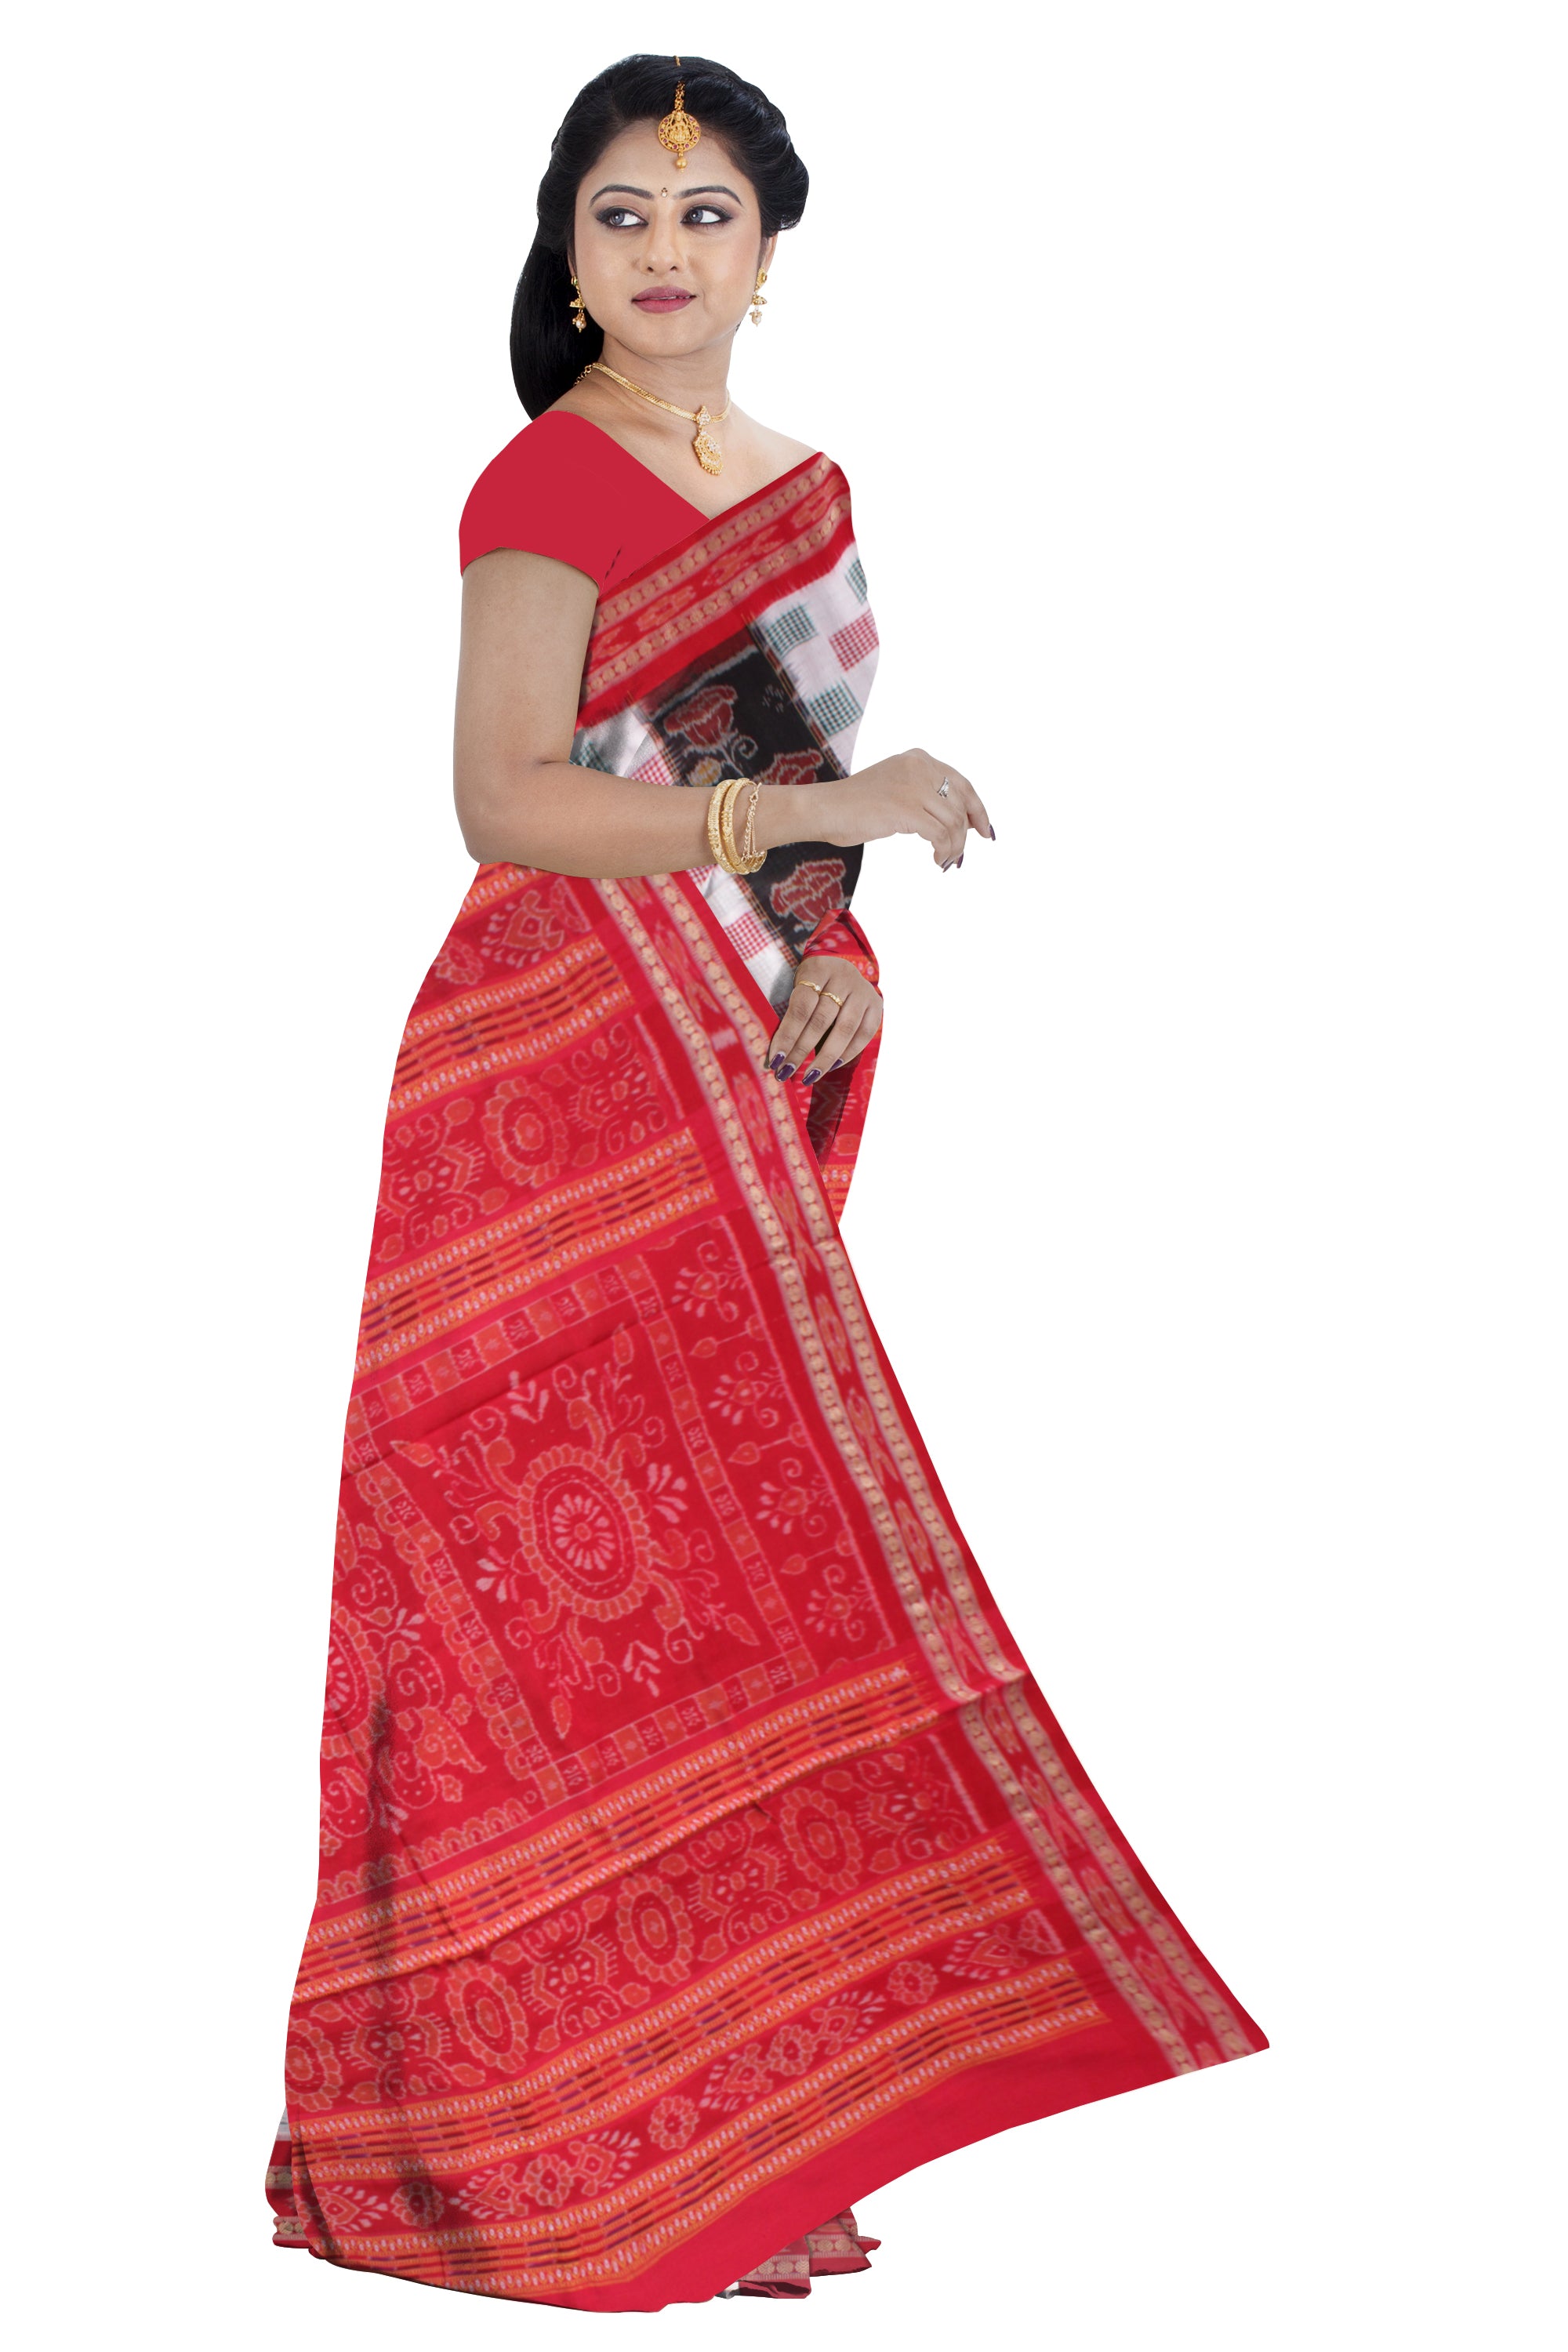 WHITE, BLACK AND RED COLOR PURE COTTON SAREE , WITH OUT BLOUSE PIECE. - Koshali Arts & Crafts Enterprise